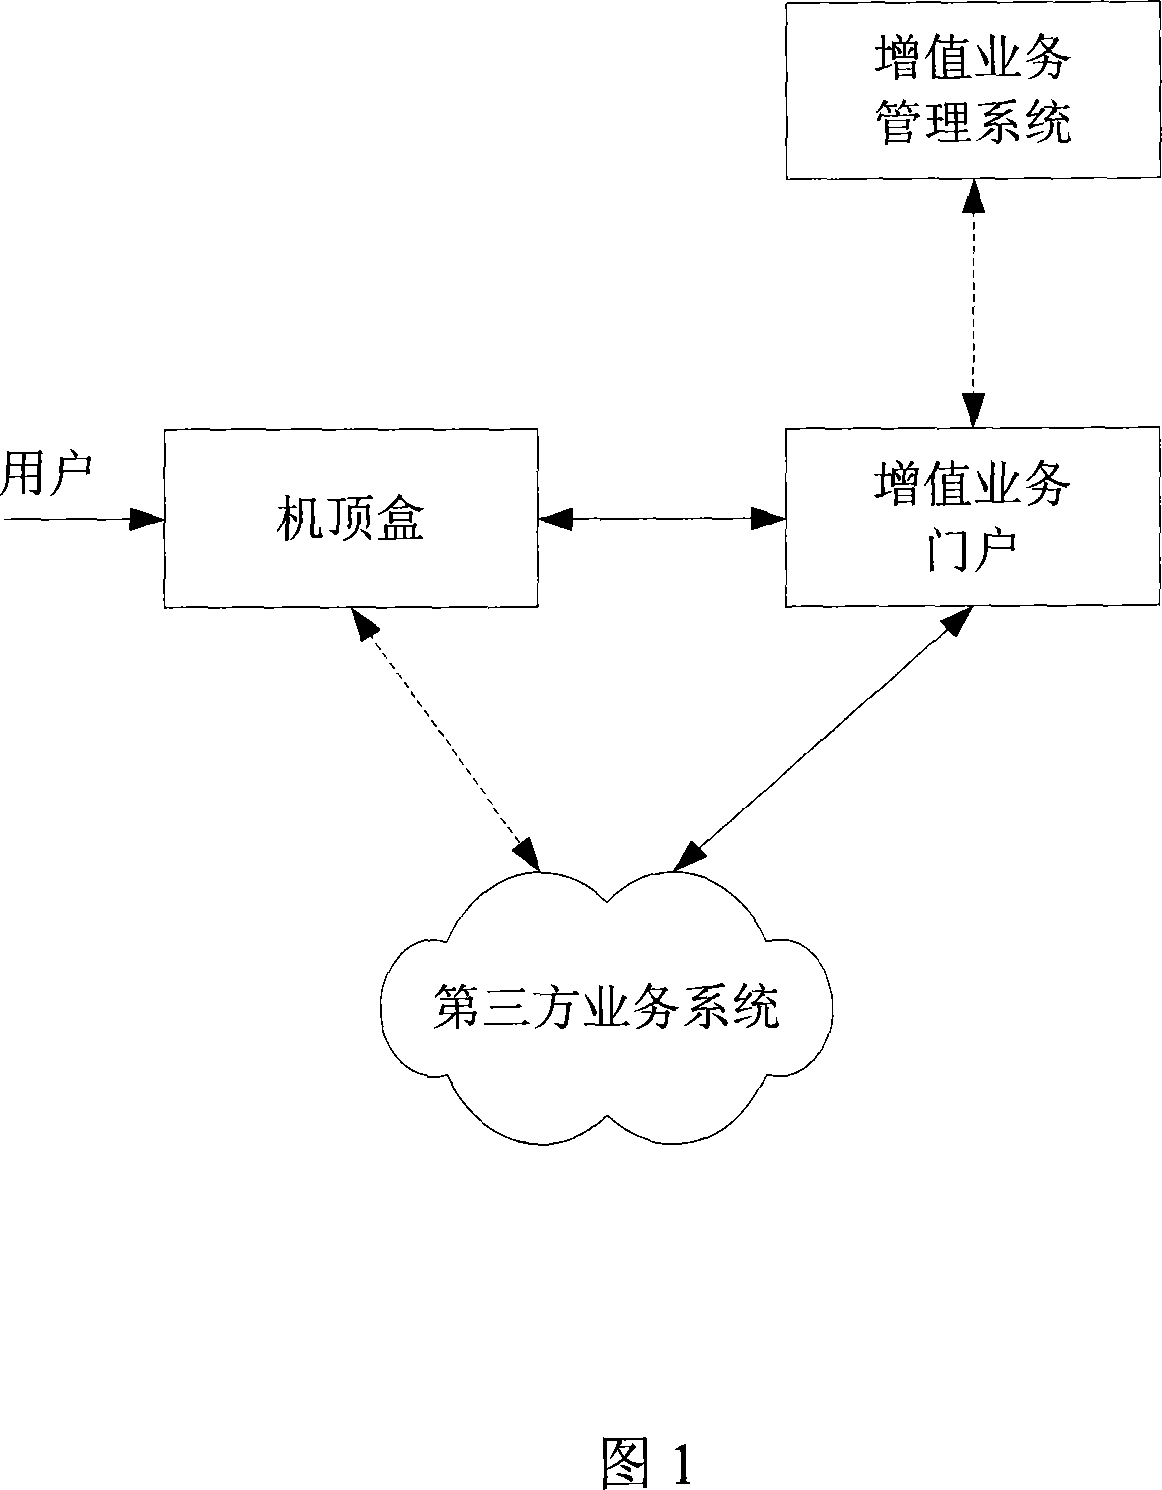 Automatic logging the third party service system and method in interactive network TV